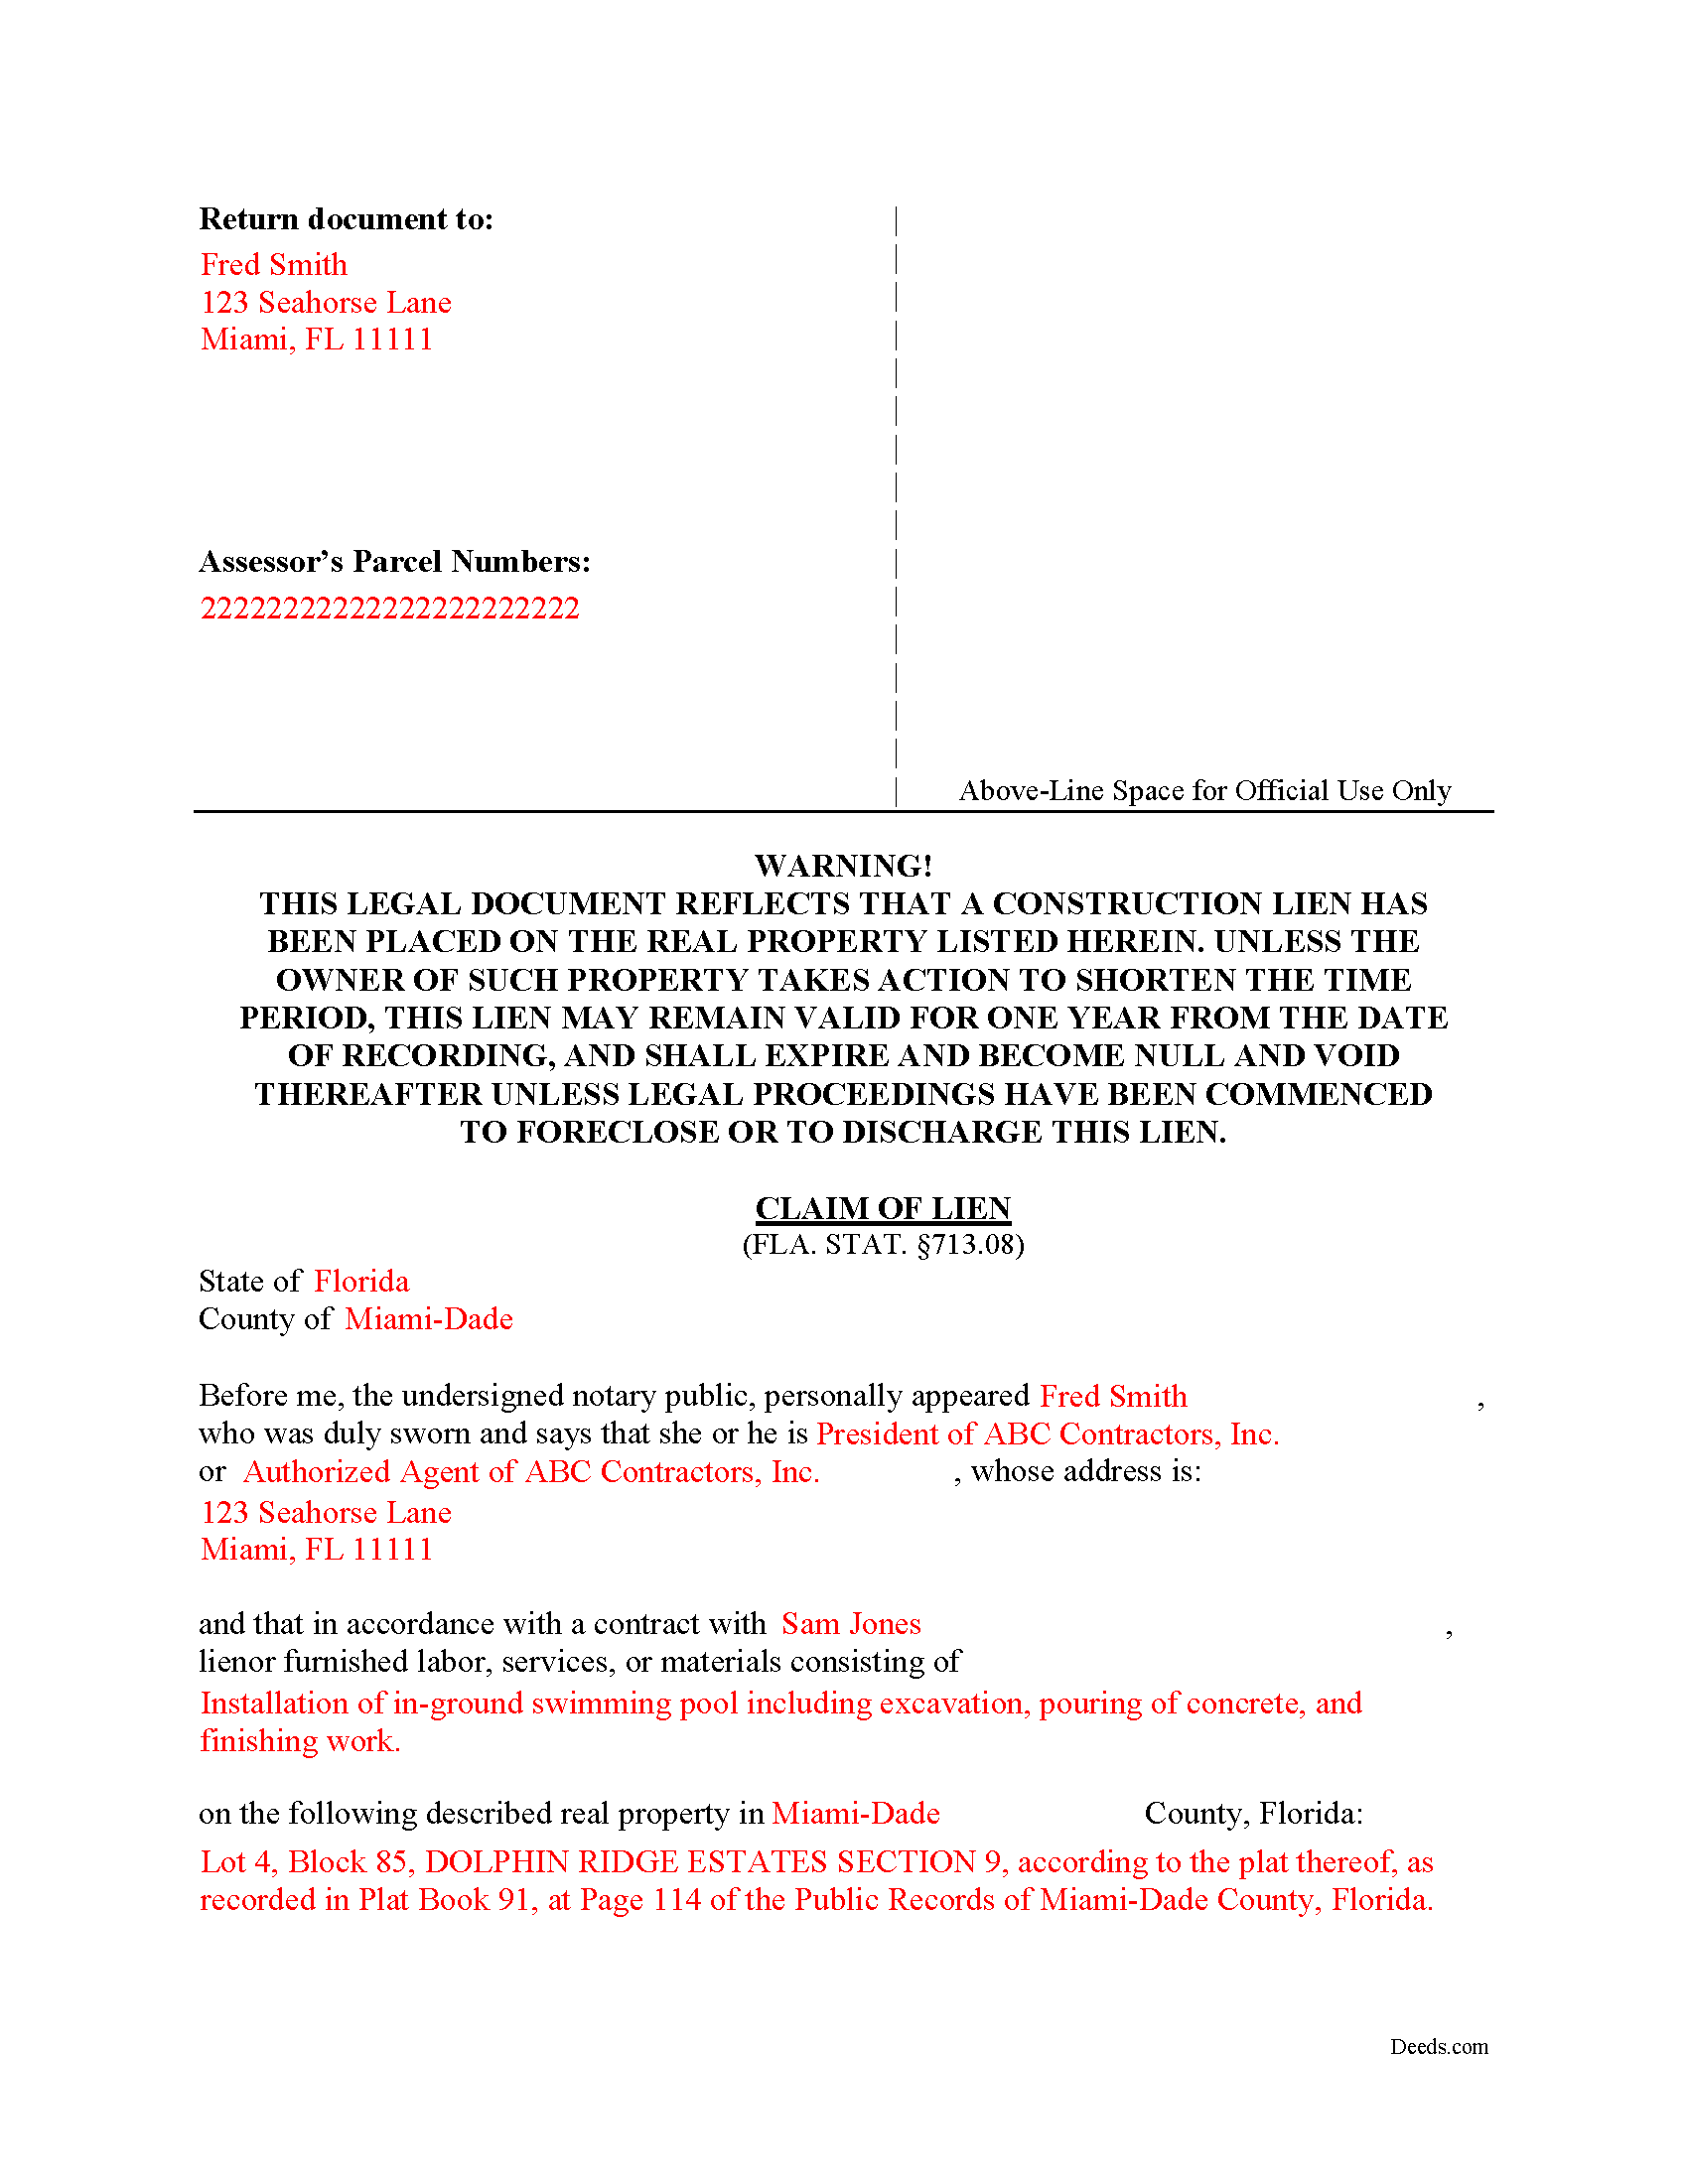 Completed Example of the Claim of Lien Document